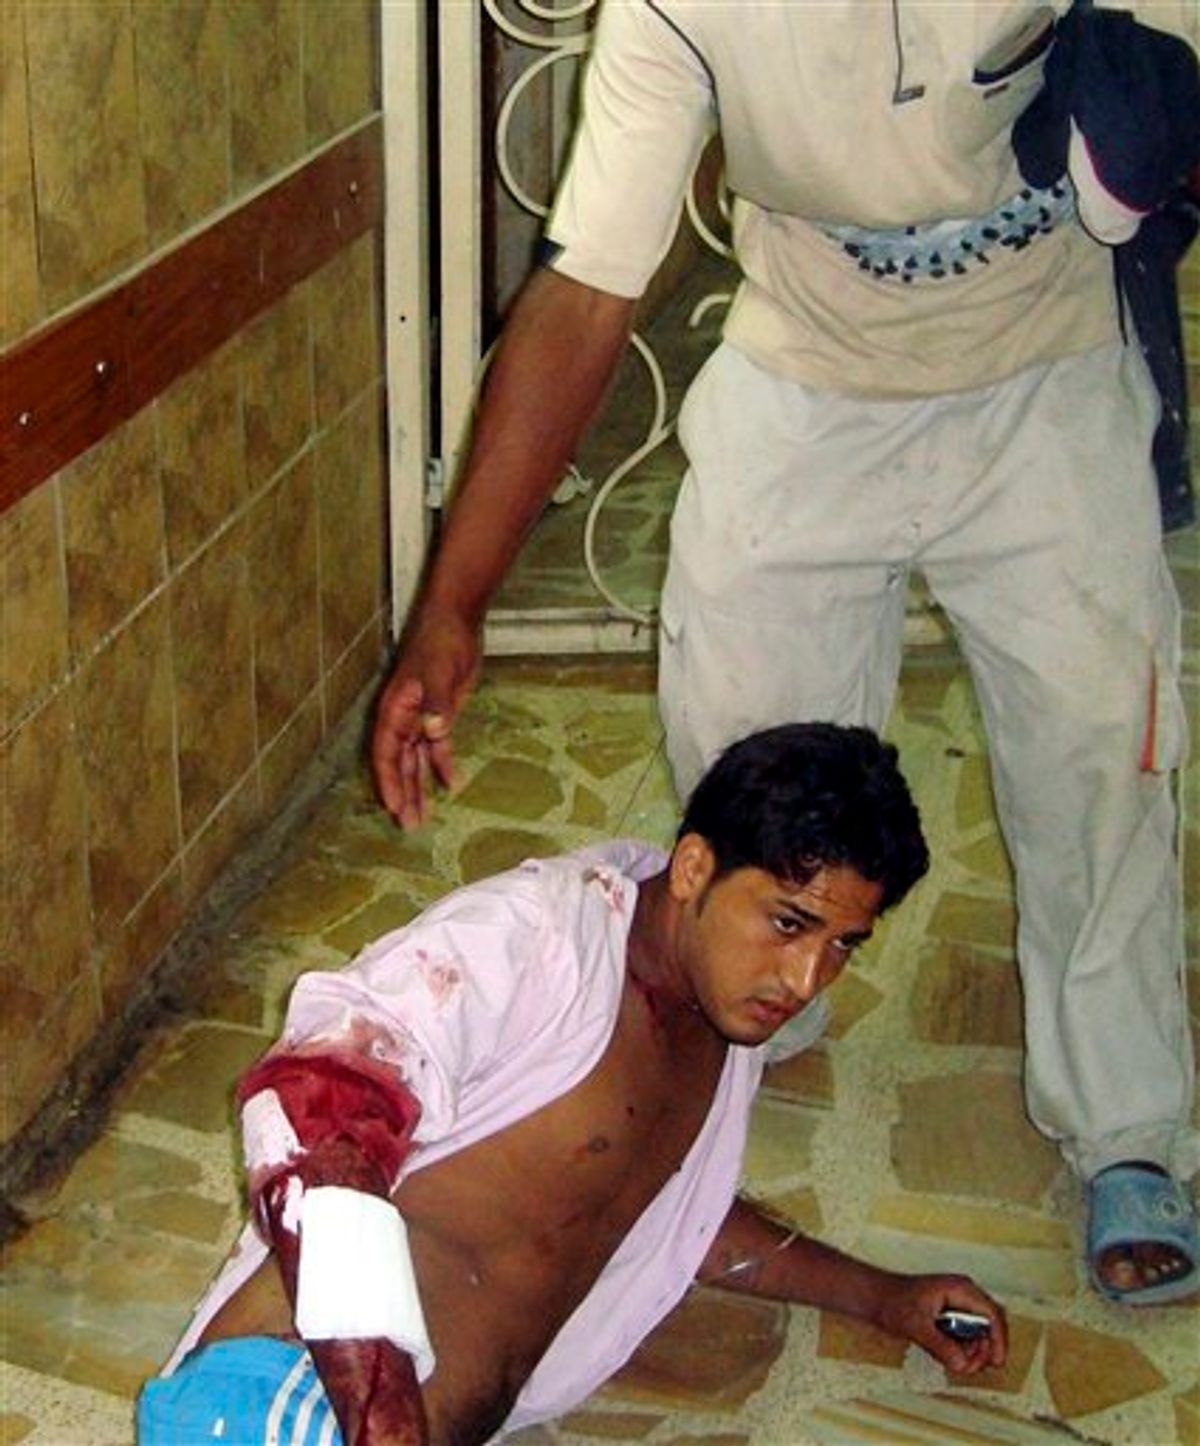 A victim of a suicide attack waits for a doctor on the floor of the emergency room of a hospital in Baghdad, Iraq, Tuesday, Aug. 17, 2010. A suicide bomber blew himself up Tuesday among hundreds of army recruits who had gathered near a military headquarters in central Baghdad killing and wounding dozens of them. (AP Photo)  (AP)